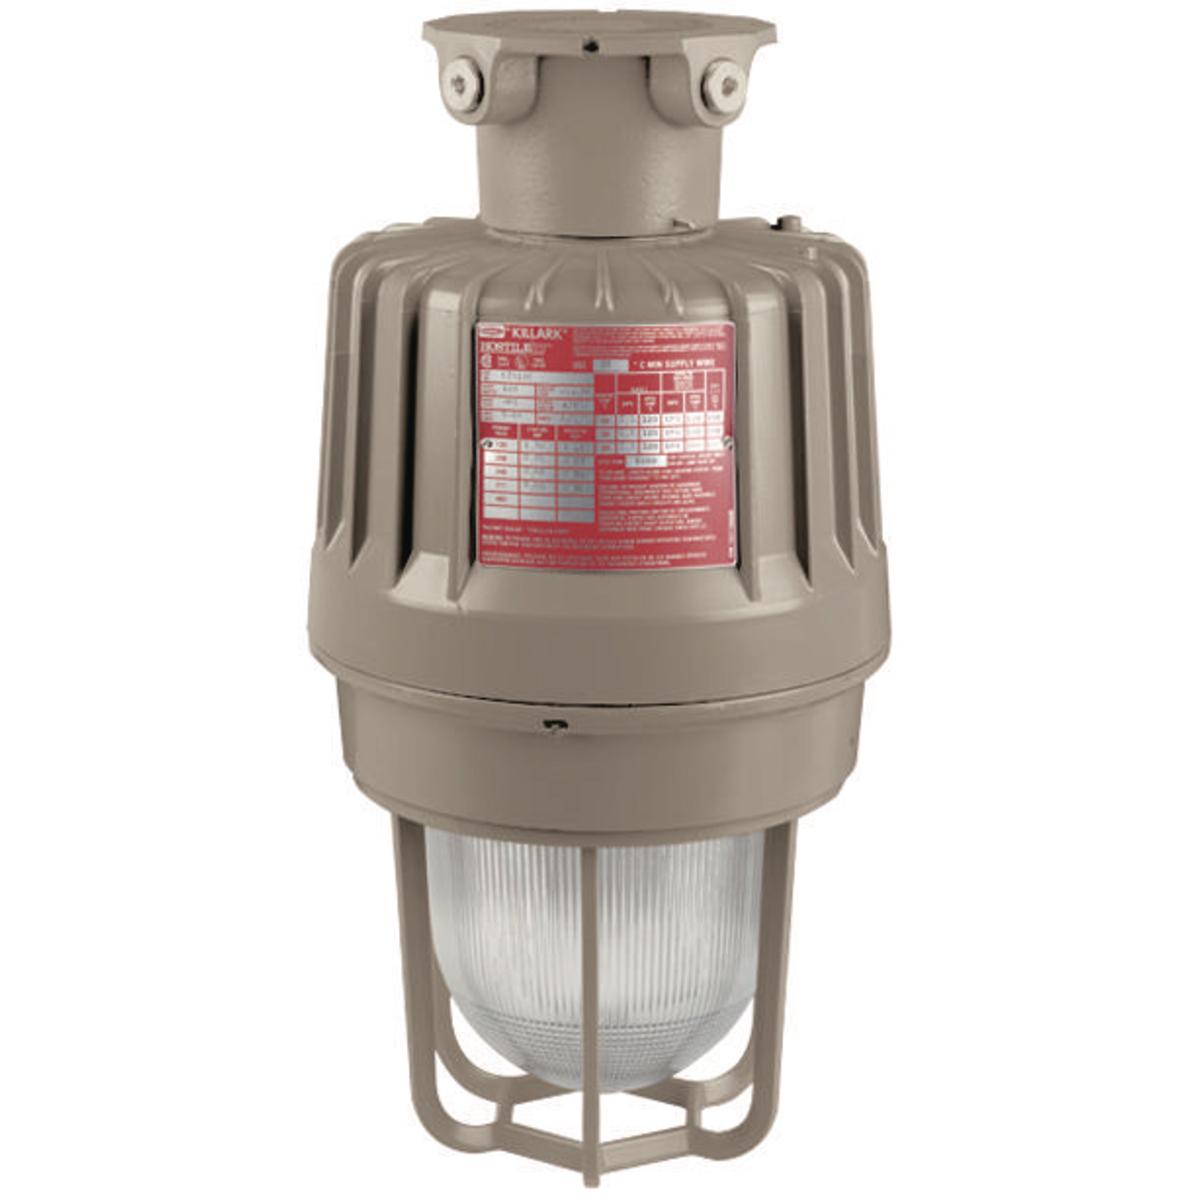 Hubbell EZS100X2G HID 100W Quadri-Volt High Pressure Sodium 3/4" Ceiling Mount with Guard  ; Three light sources – High Pressure Sodium (50-400W), Metal Halide (70-400W) and Pulse Start Metal Halide (175-400W) ; Mounting choice –Pendant, ceiling, 25˚ stanchion or 90˚ wall 